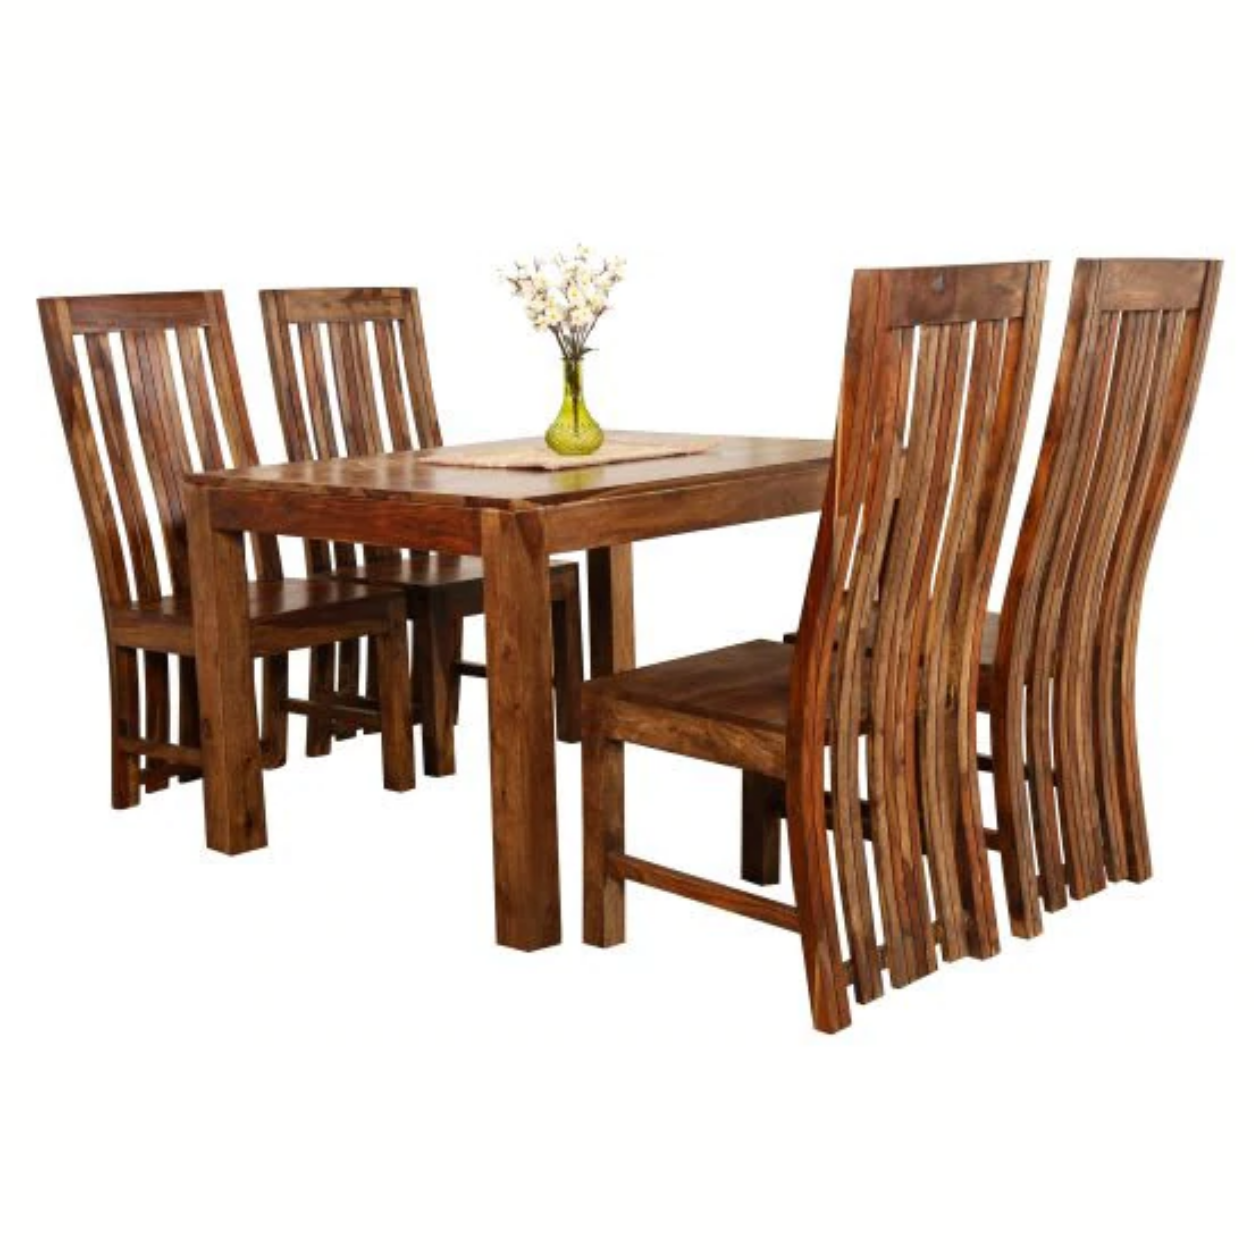 Sheesham Furniture Solid Wood Four Seat Dining Set in Natural finish